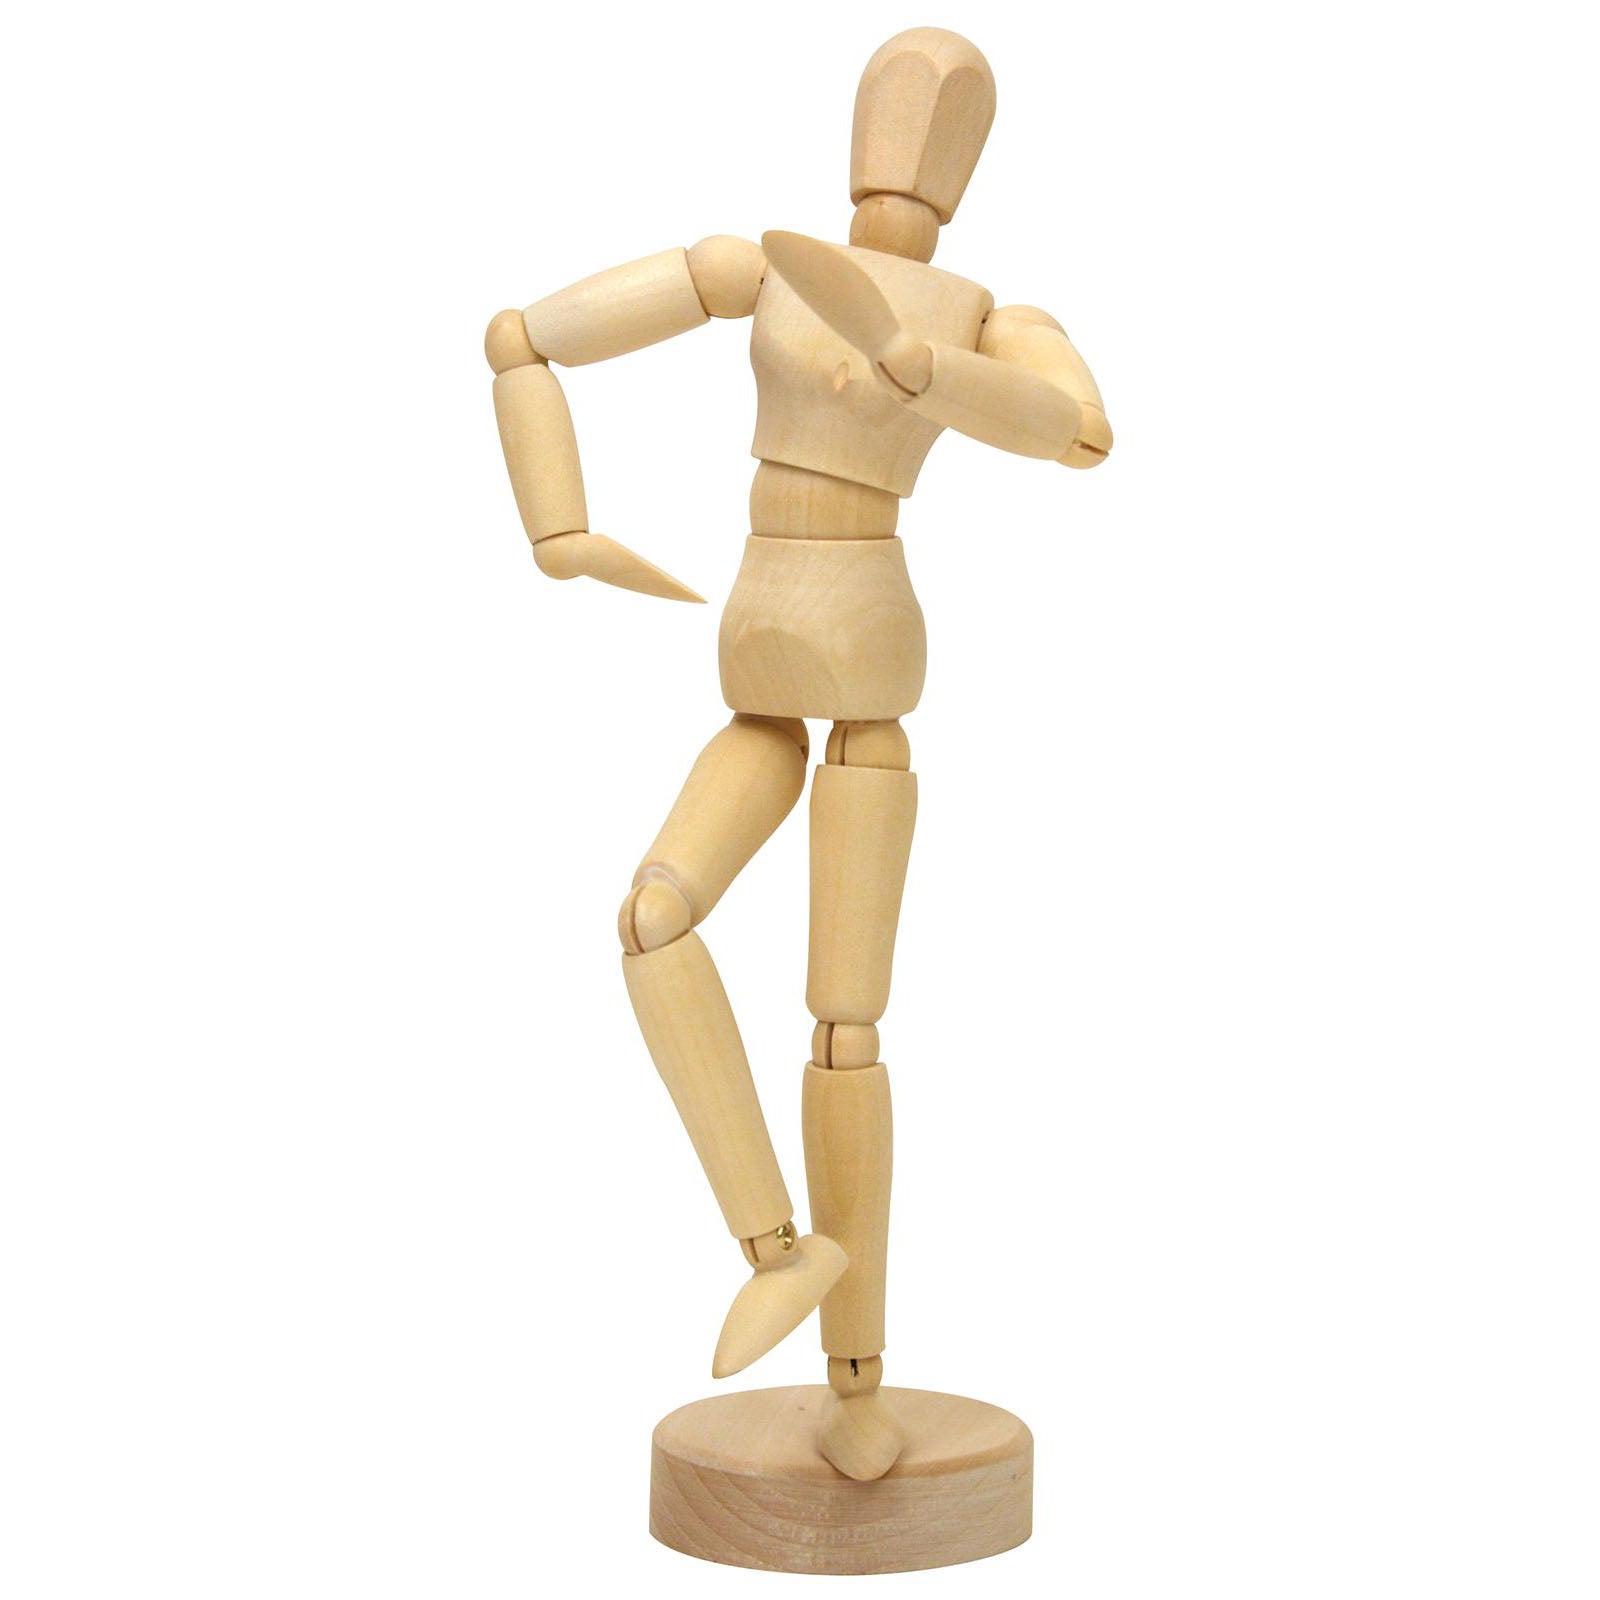 Drawing Figure Model, 8 Wooden Mannequin, India